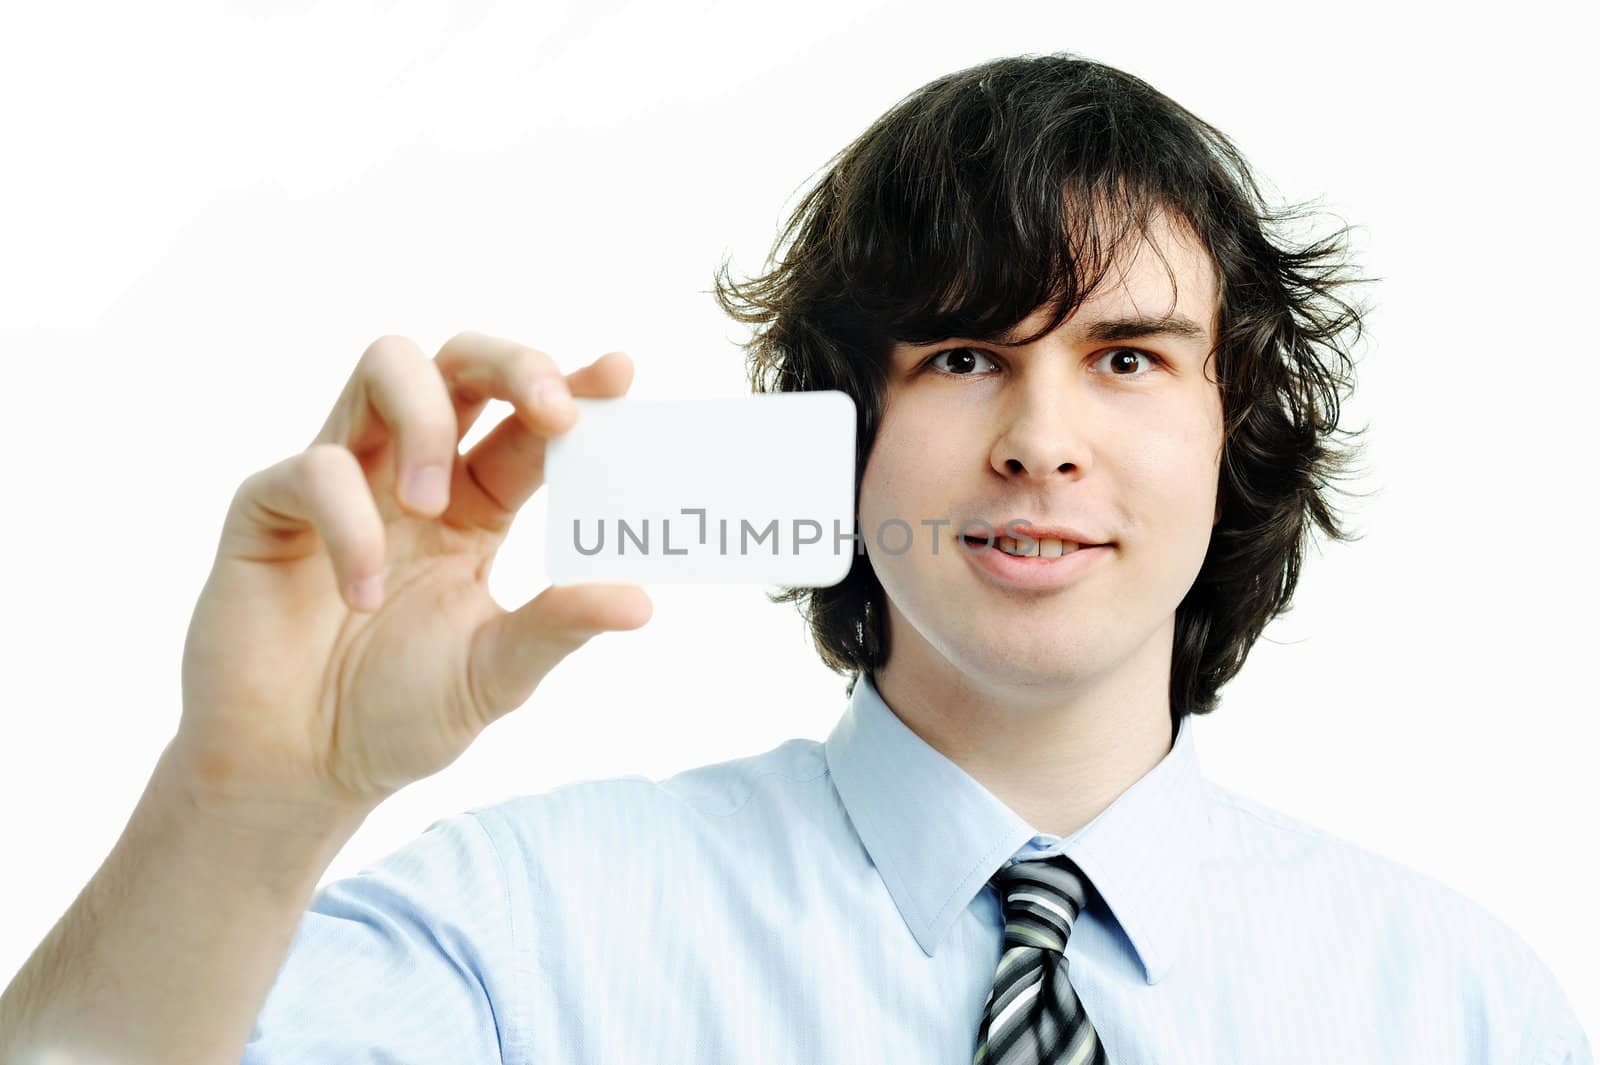 An image of yound businessman showing white card